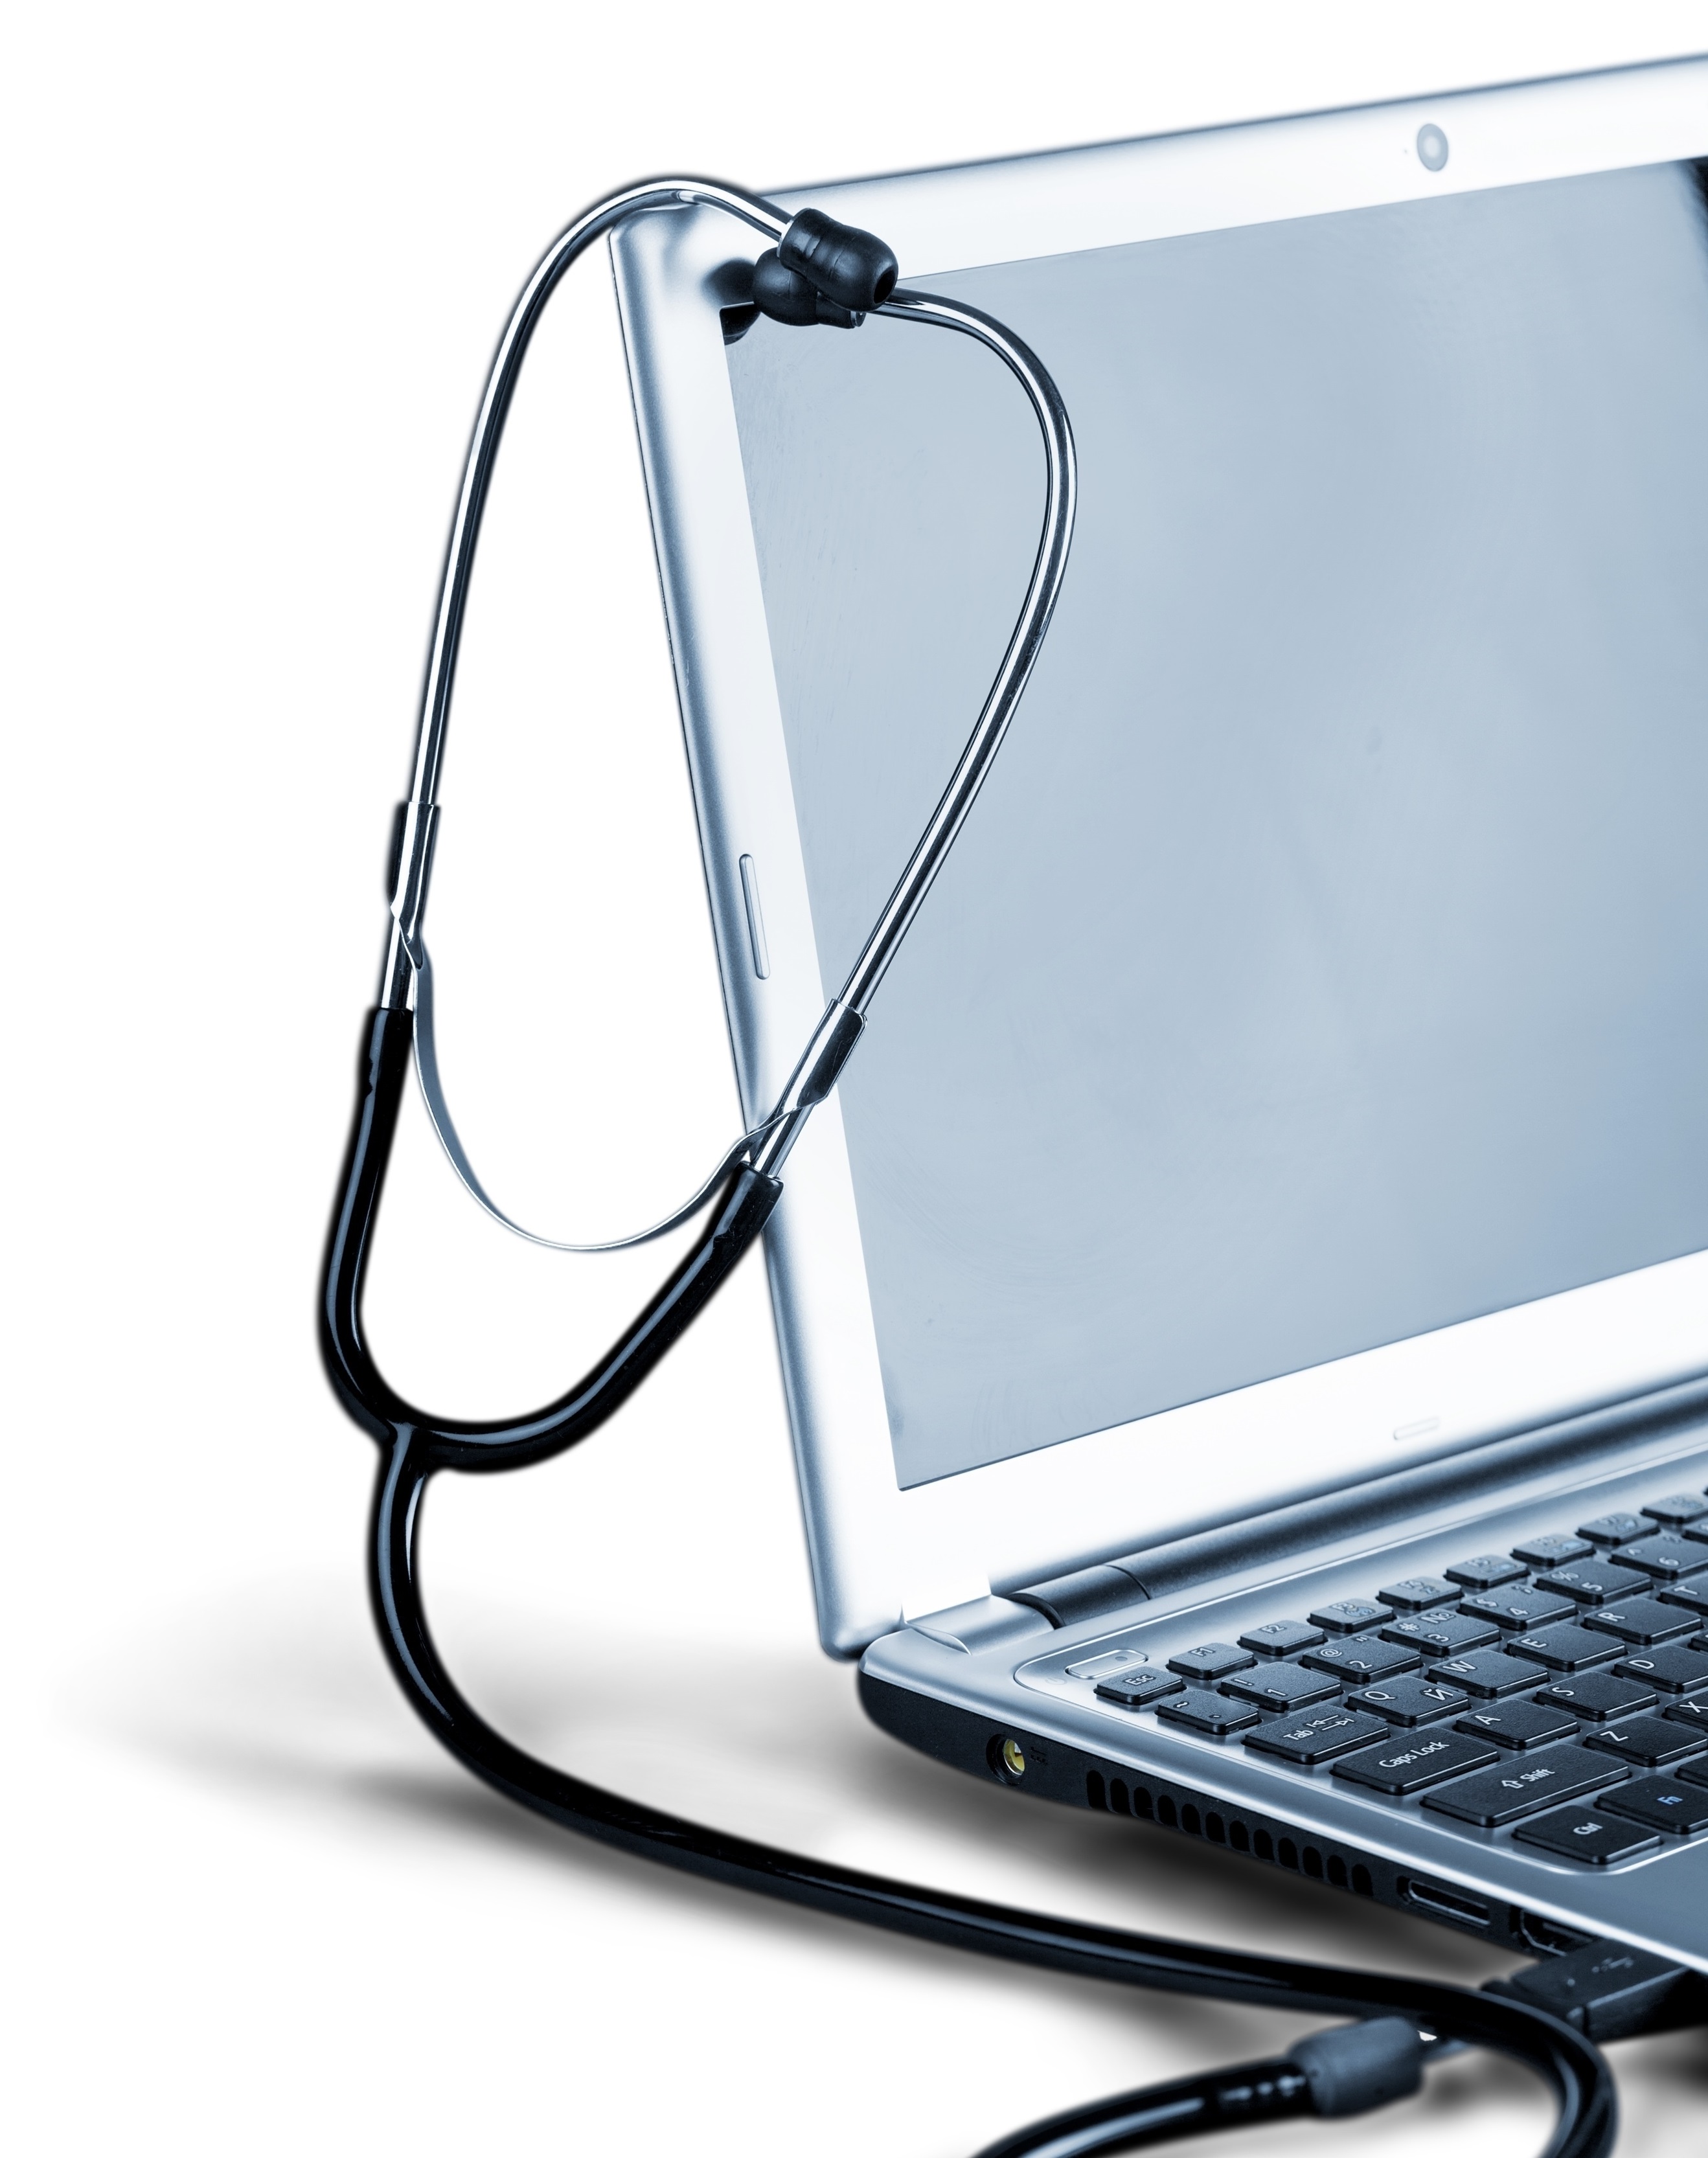 Laptop and Stethoscope